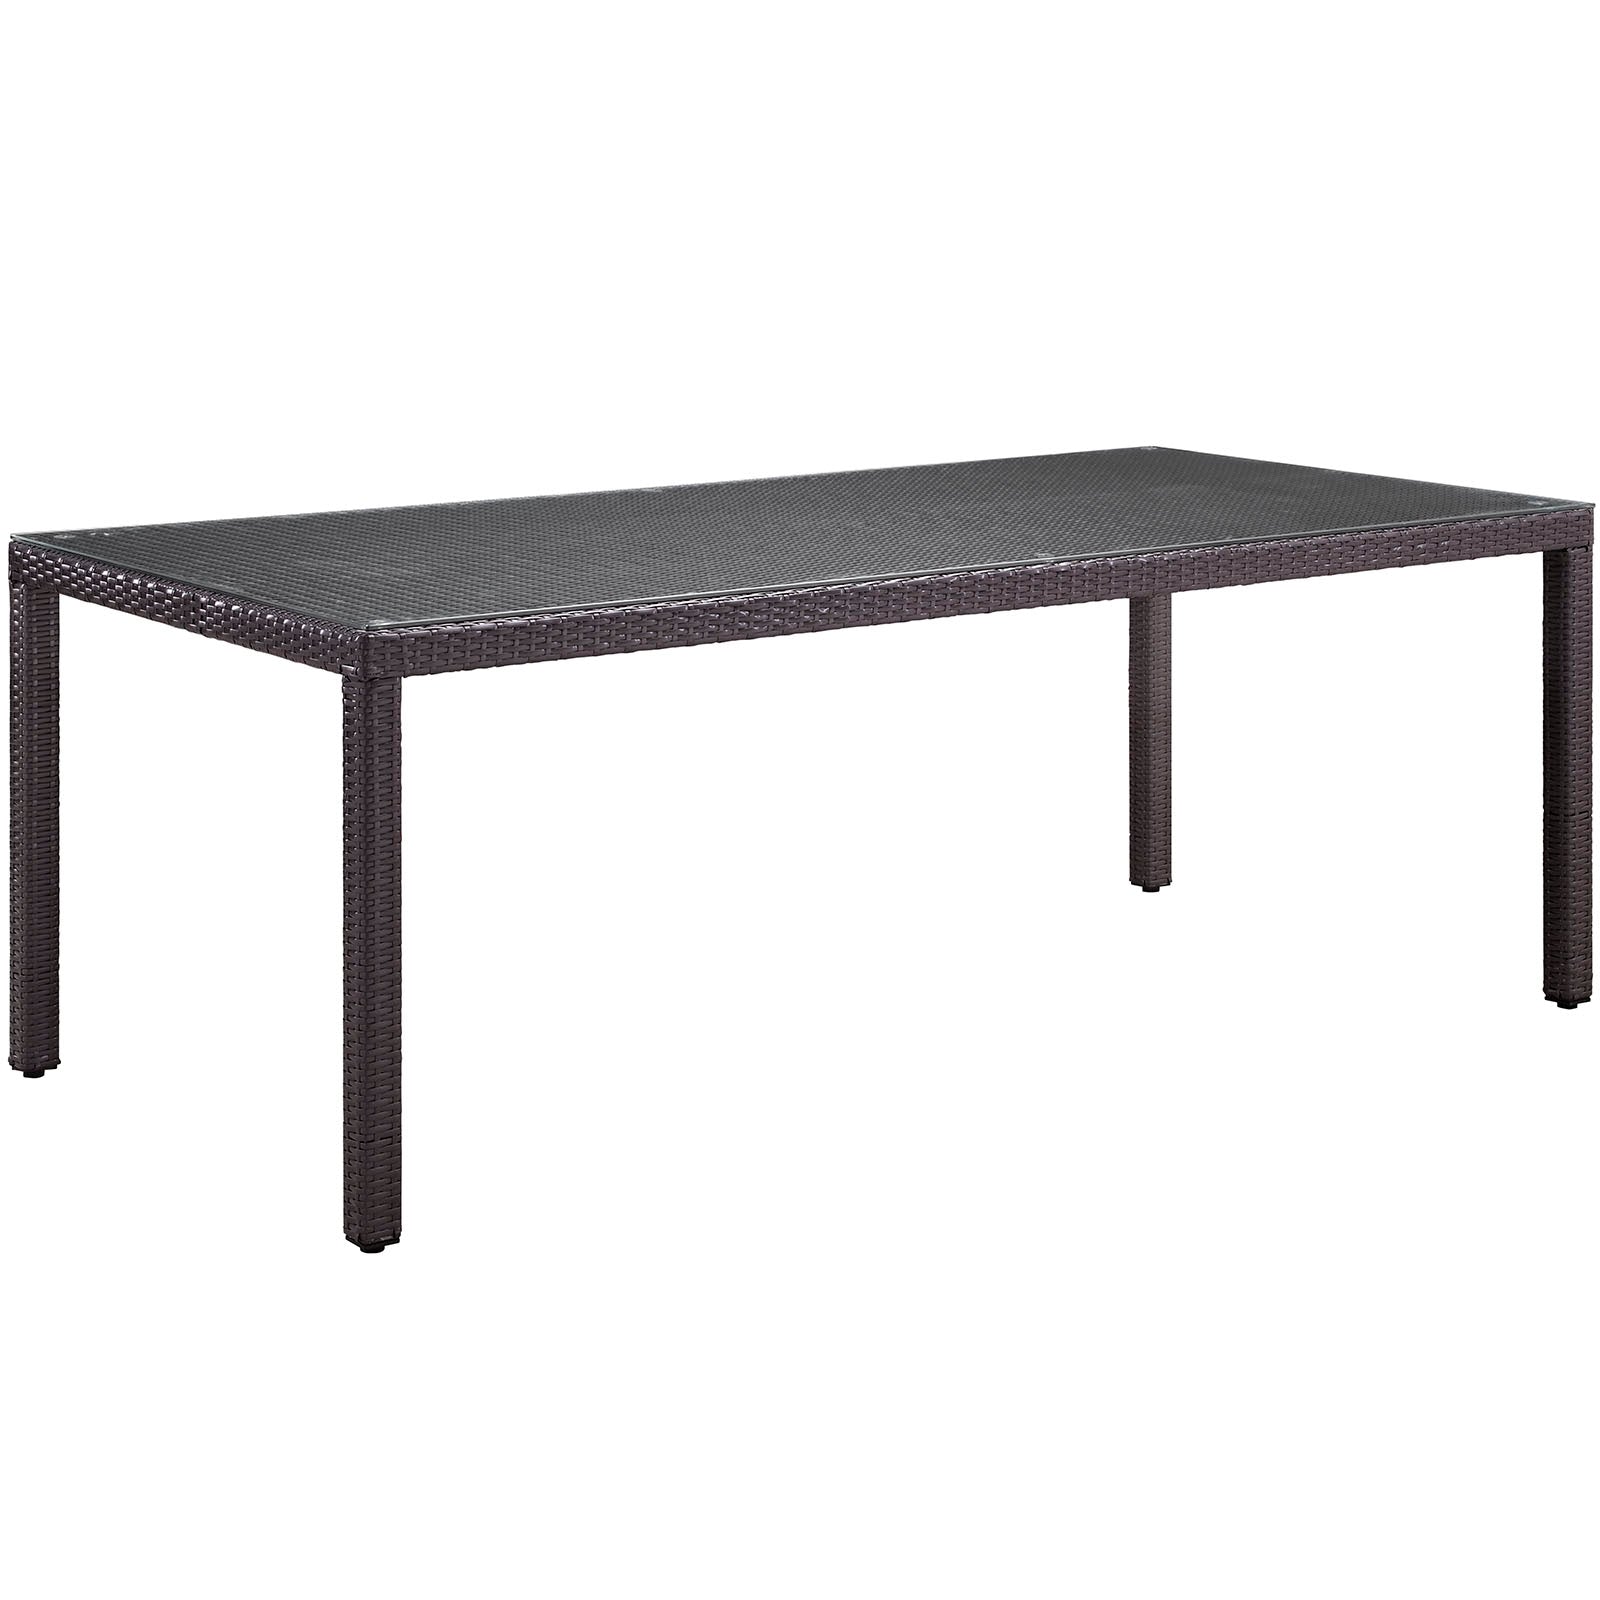 Convene 82" Outdoor Patio Dining Table - East Shore Modern Home Furnishings